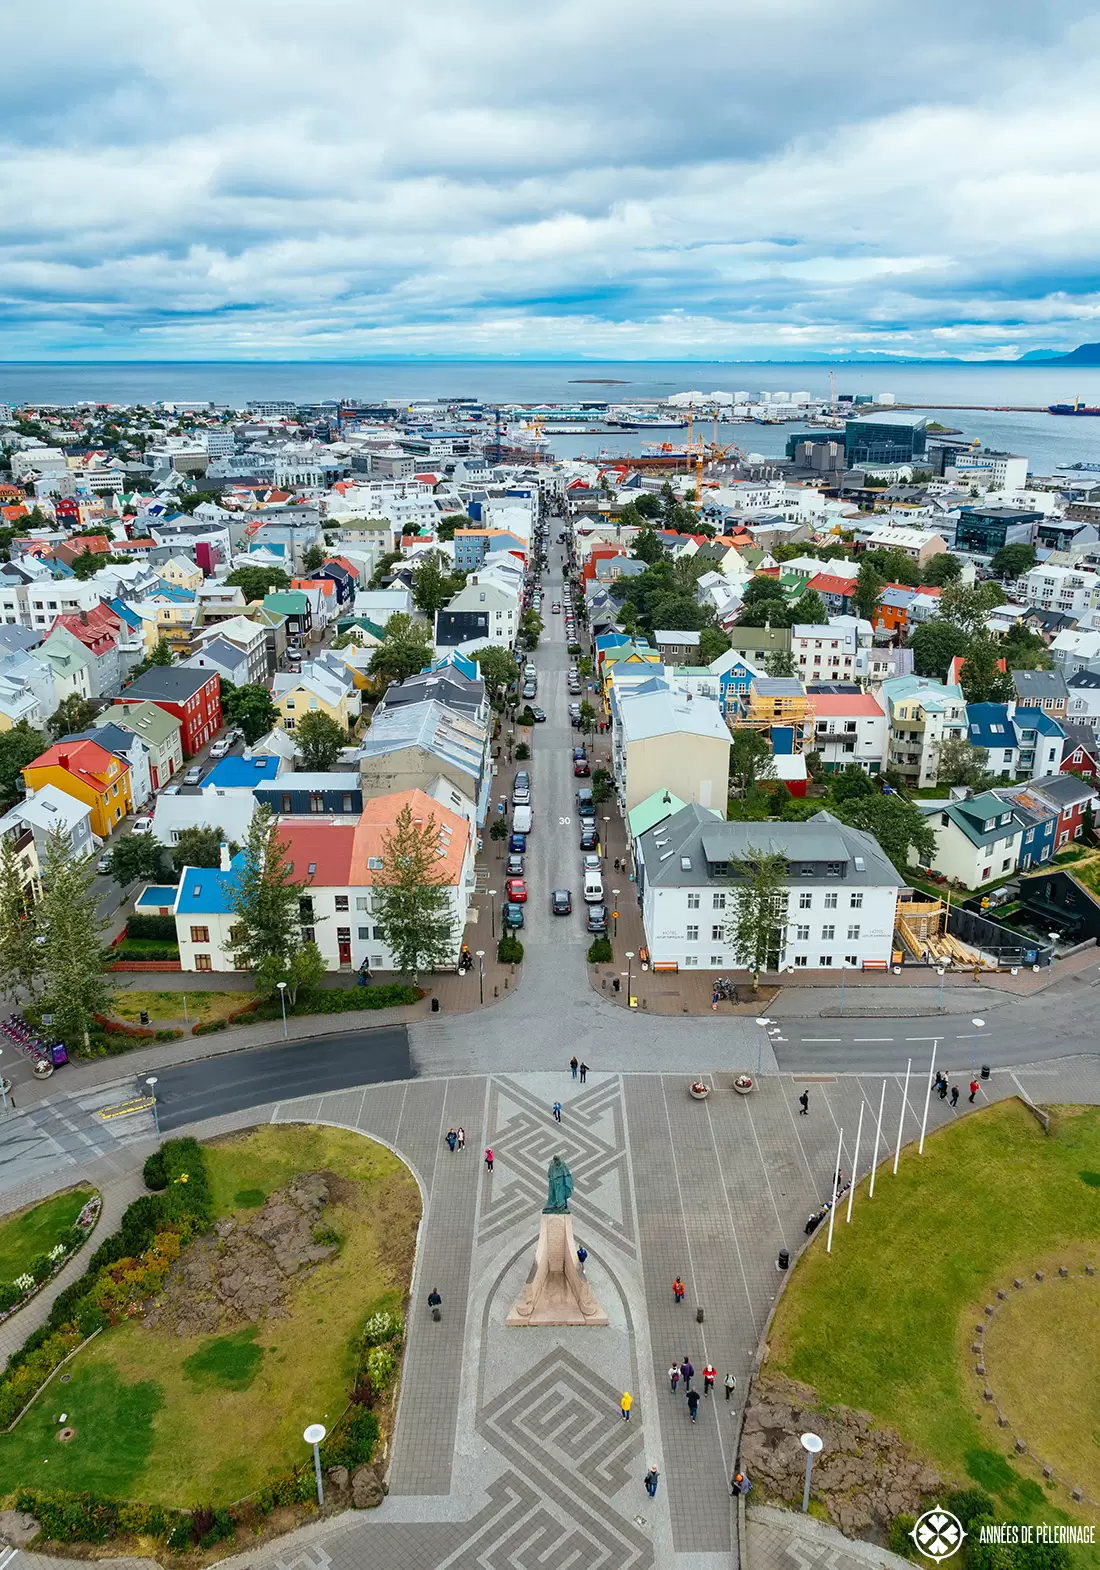 The 10 Best Things To Do In Reykjavik Iceland Travel Guide For First